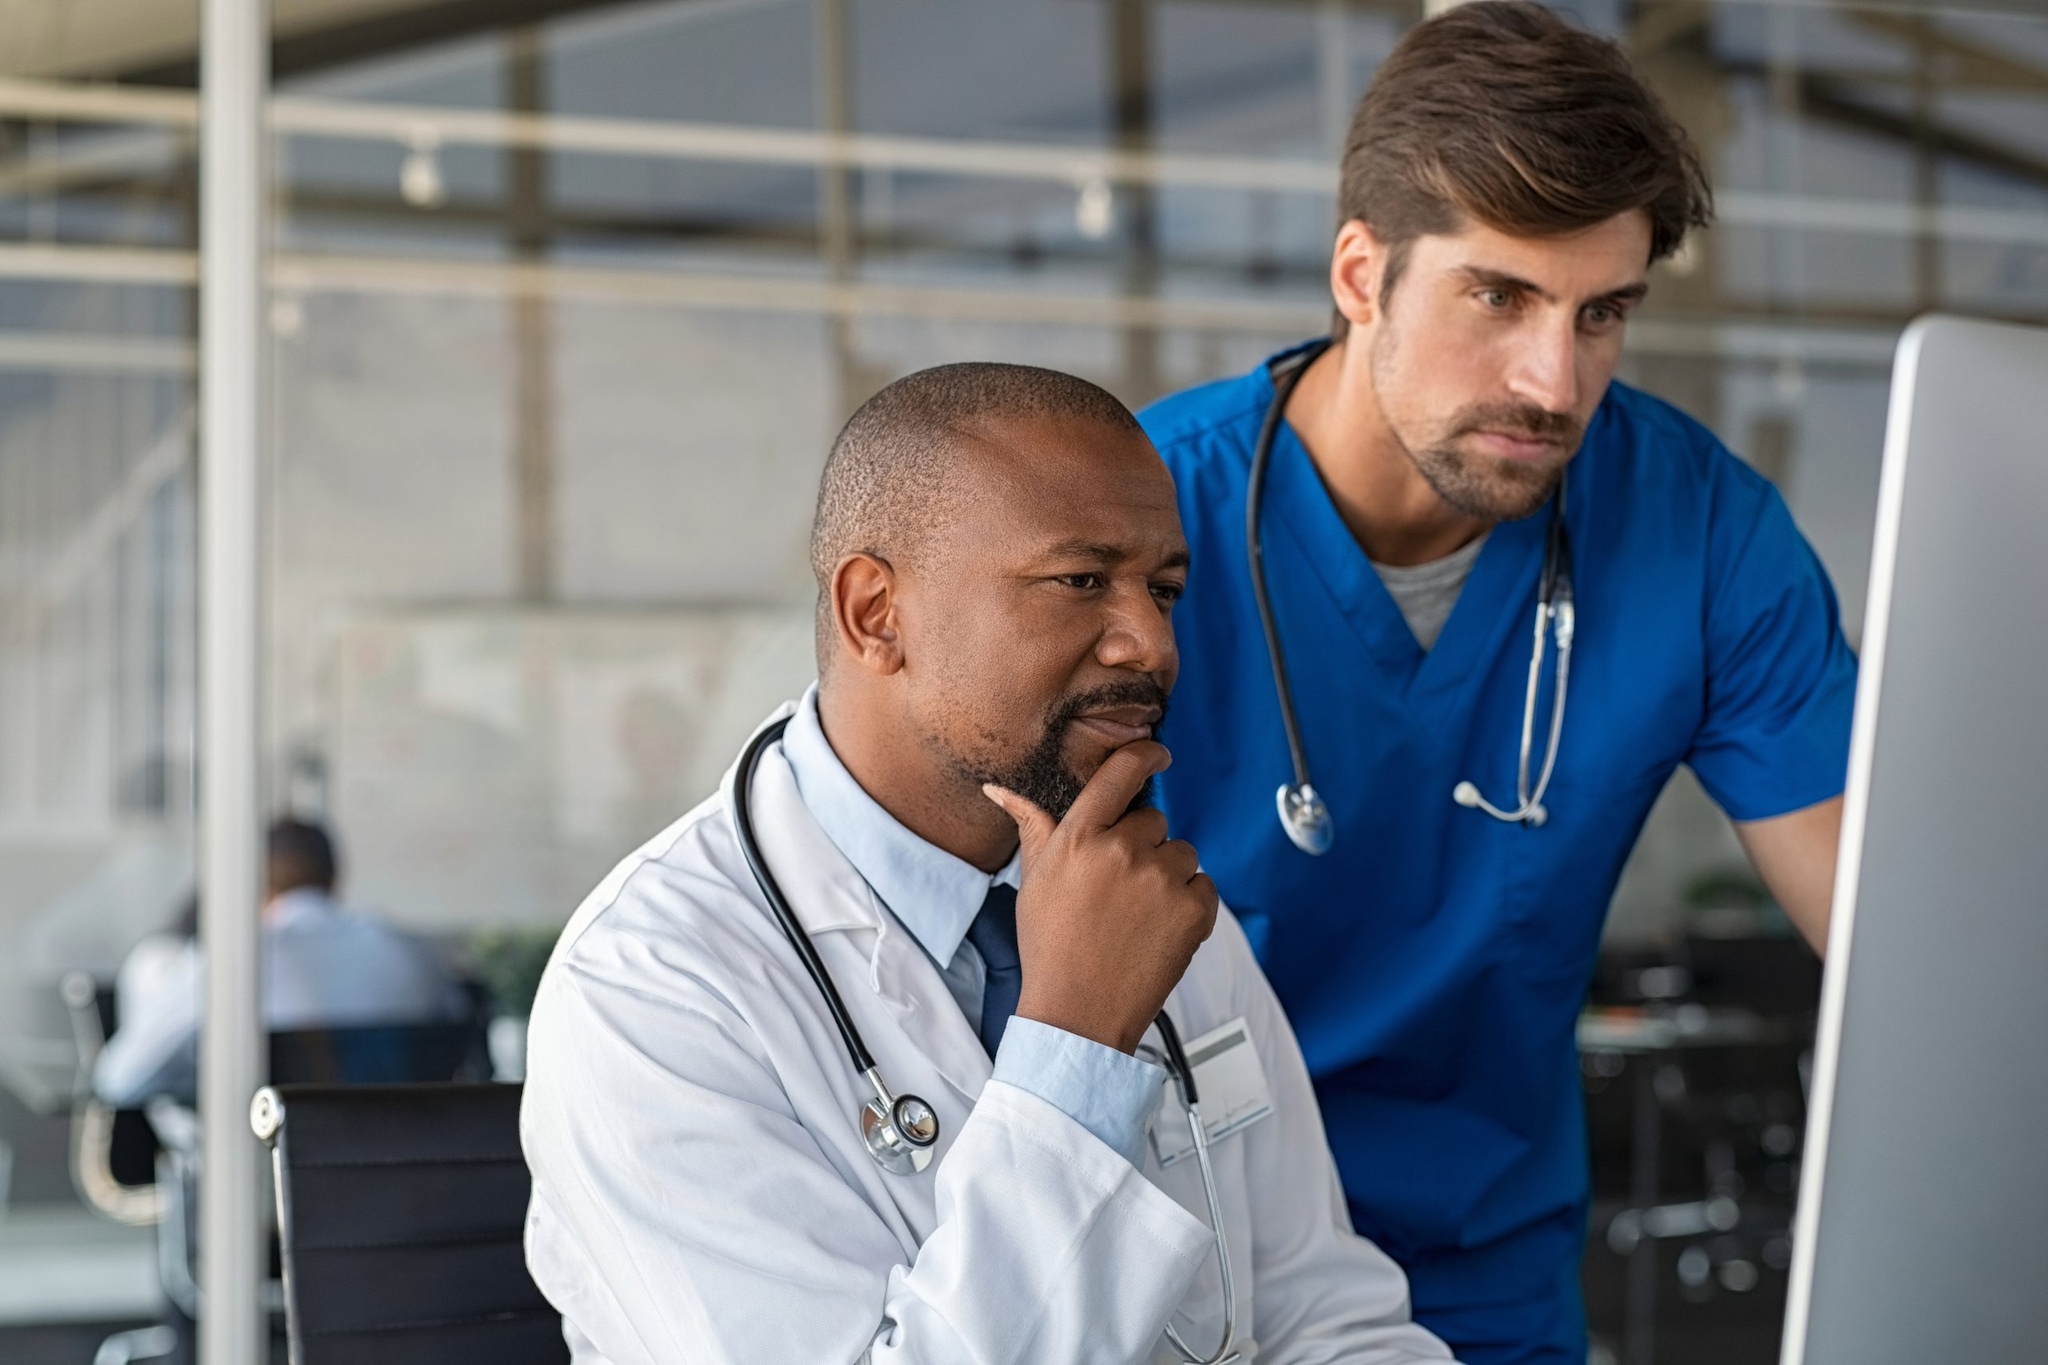 Male healthcare providers discuss a patient while looking at a computer.